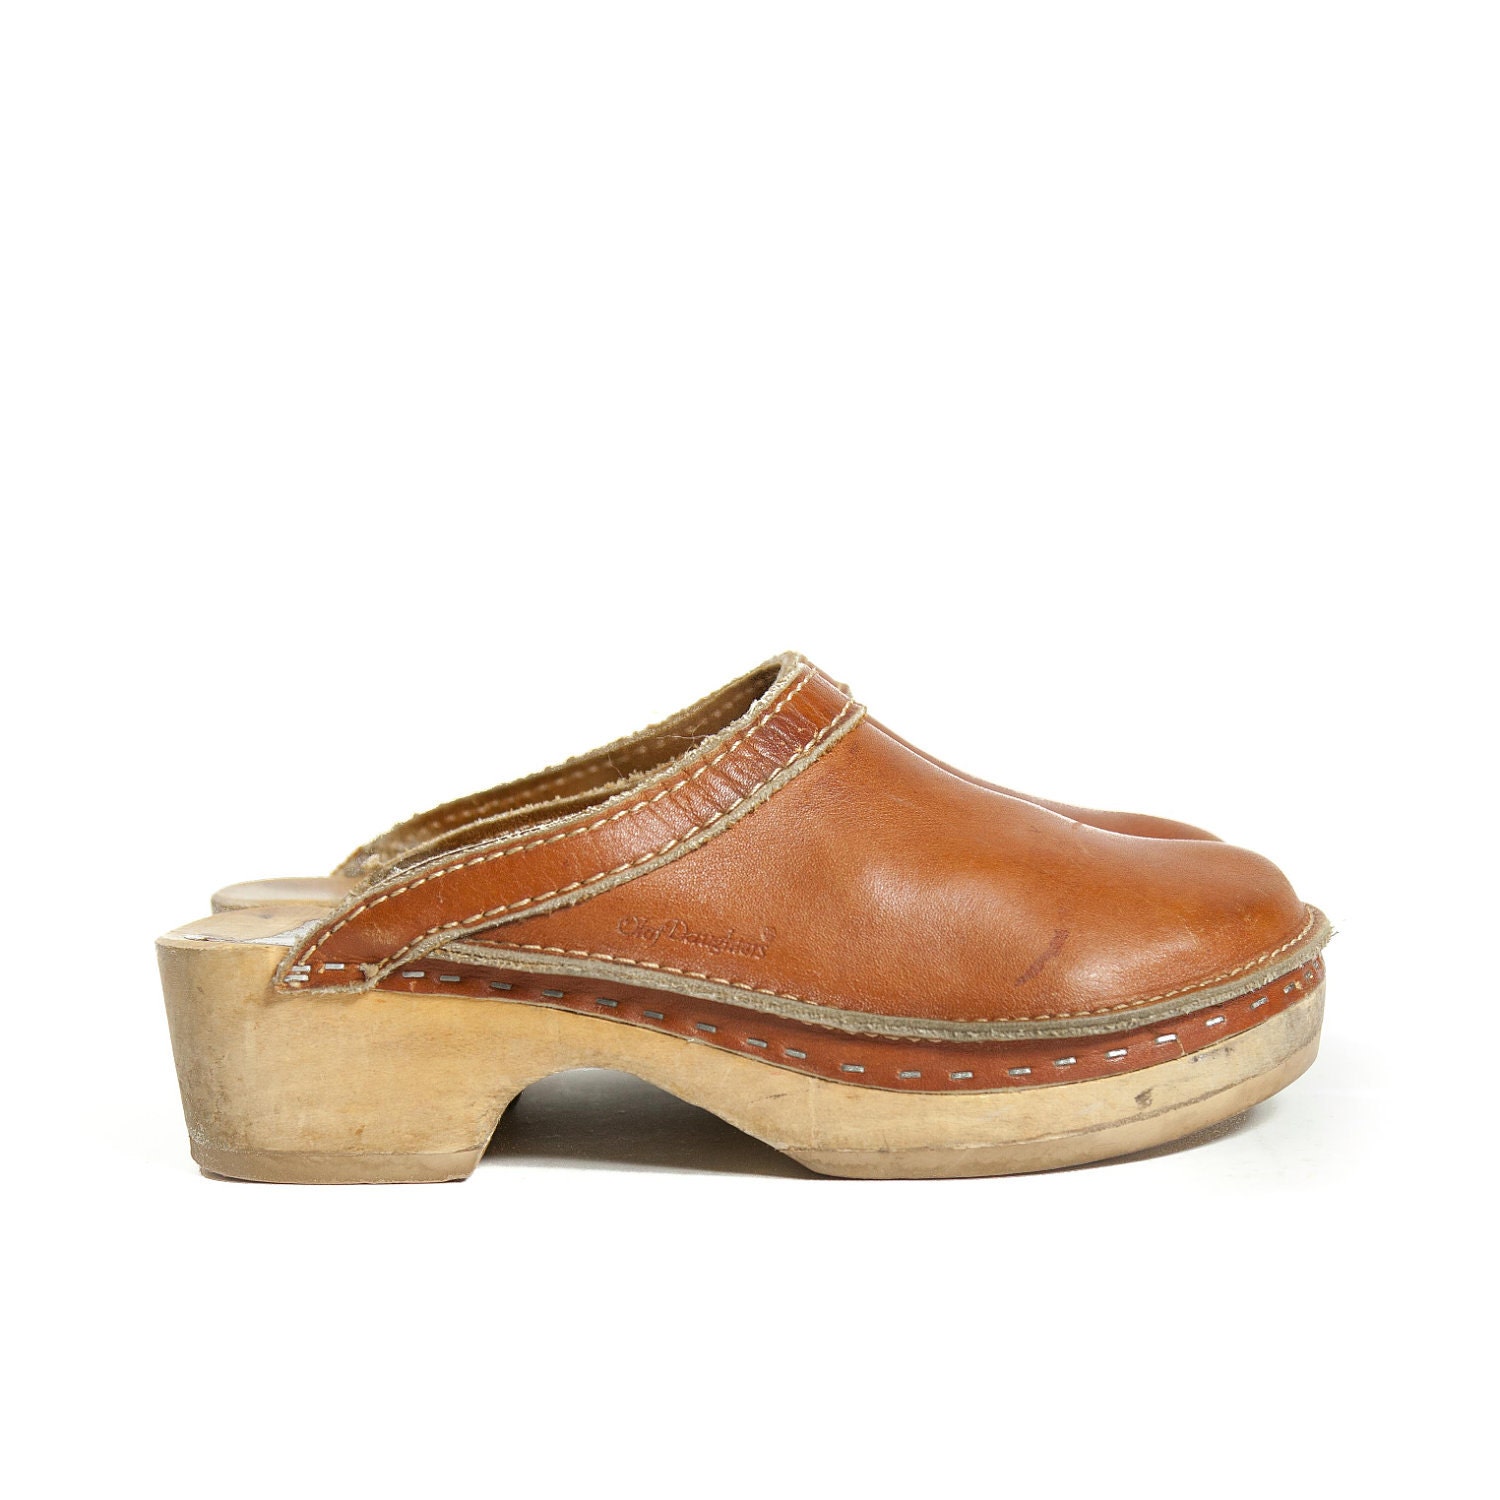 Brown Leather and Wooden Clogs by Olof' Daughters for